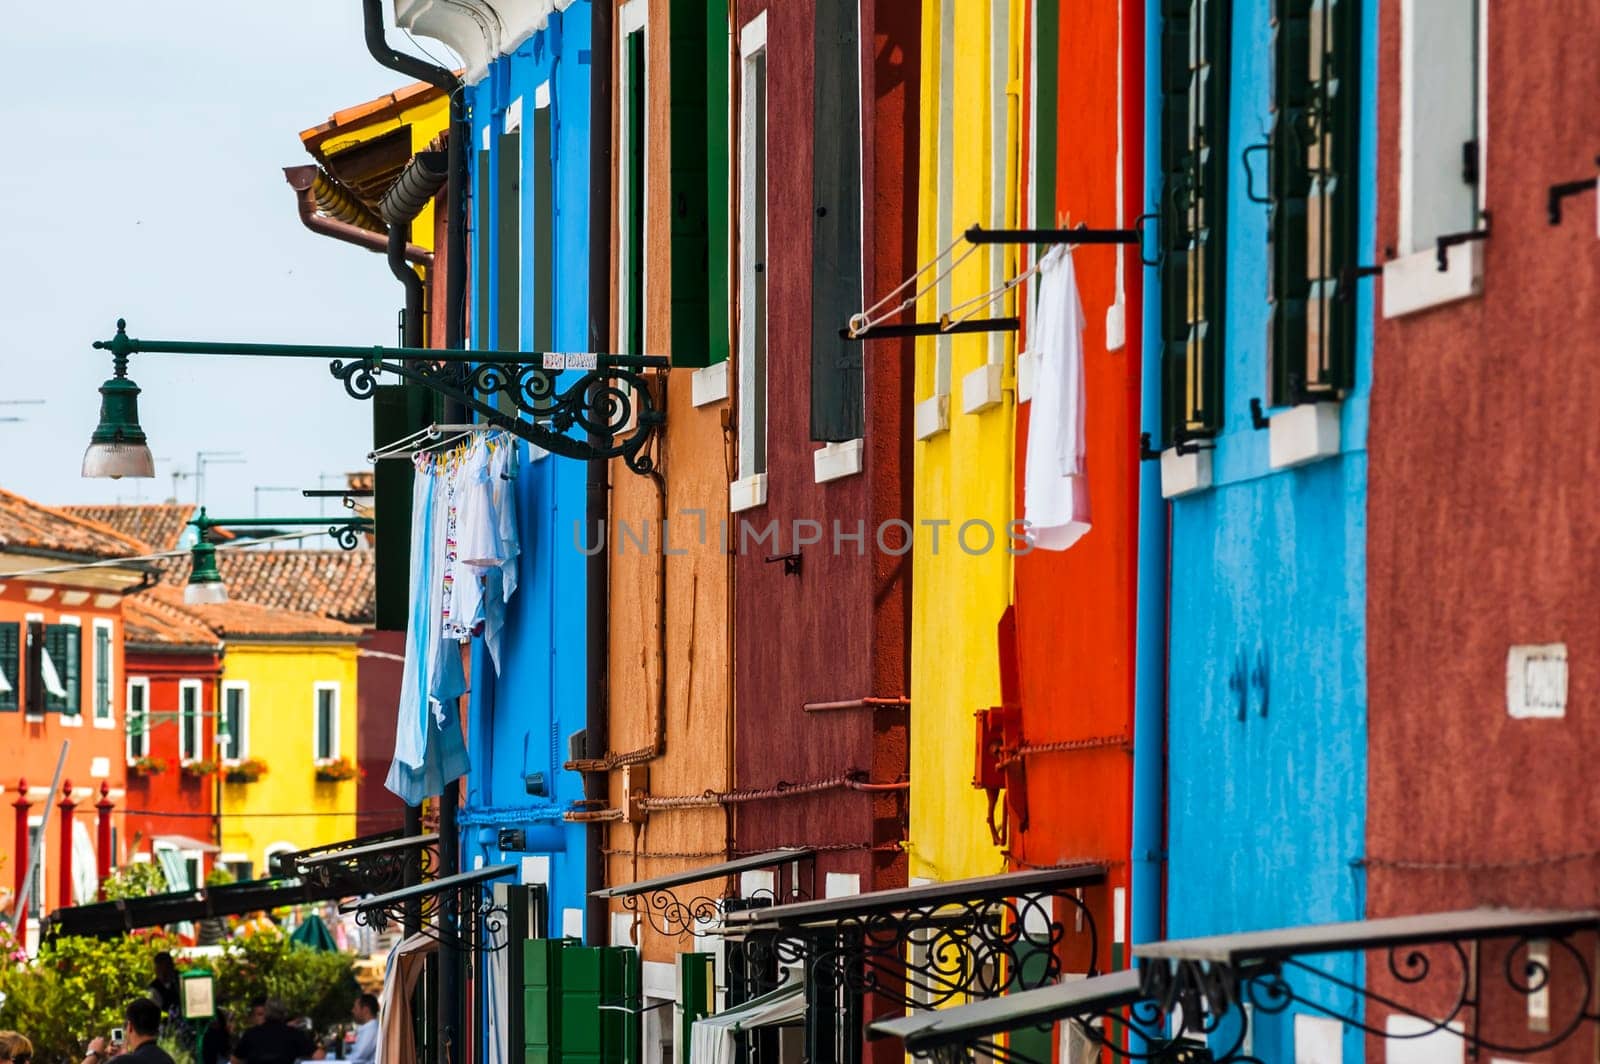 The colors of Burano, Venice by Giamplume